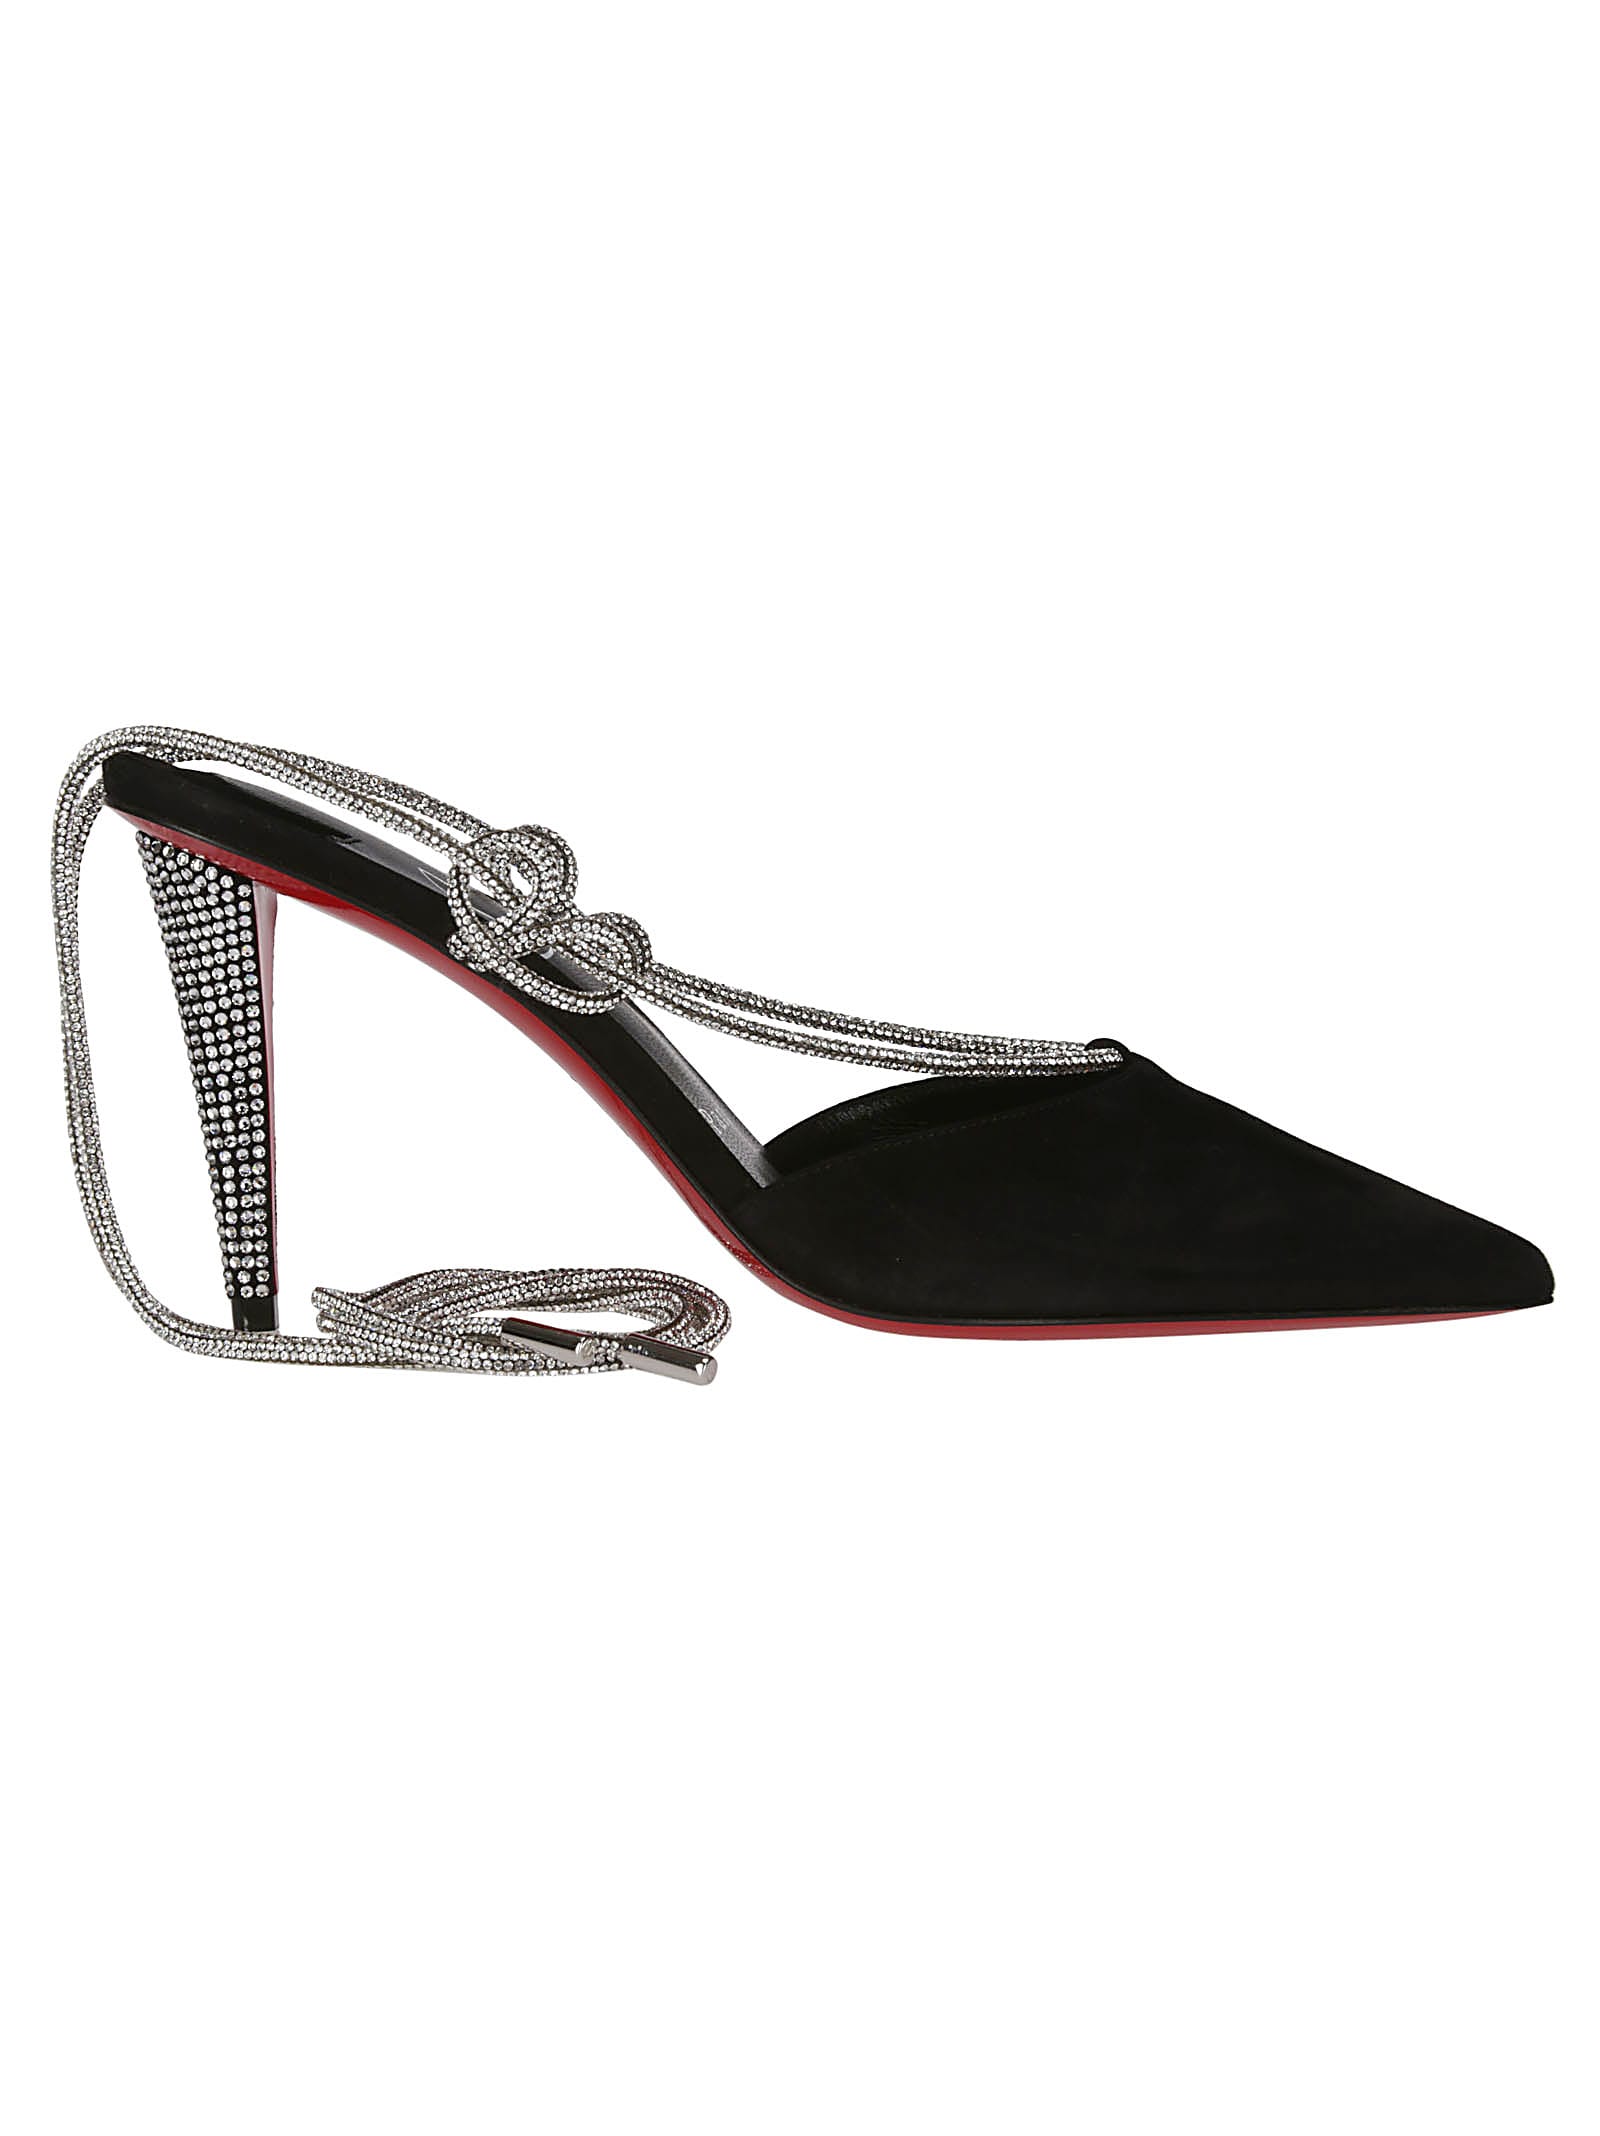 Shop Christian Louboutin Astrid Lace Strass 85 In Black/cry/lin Black